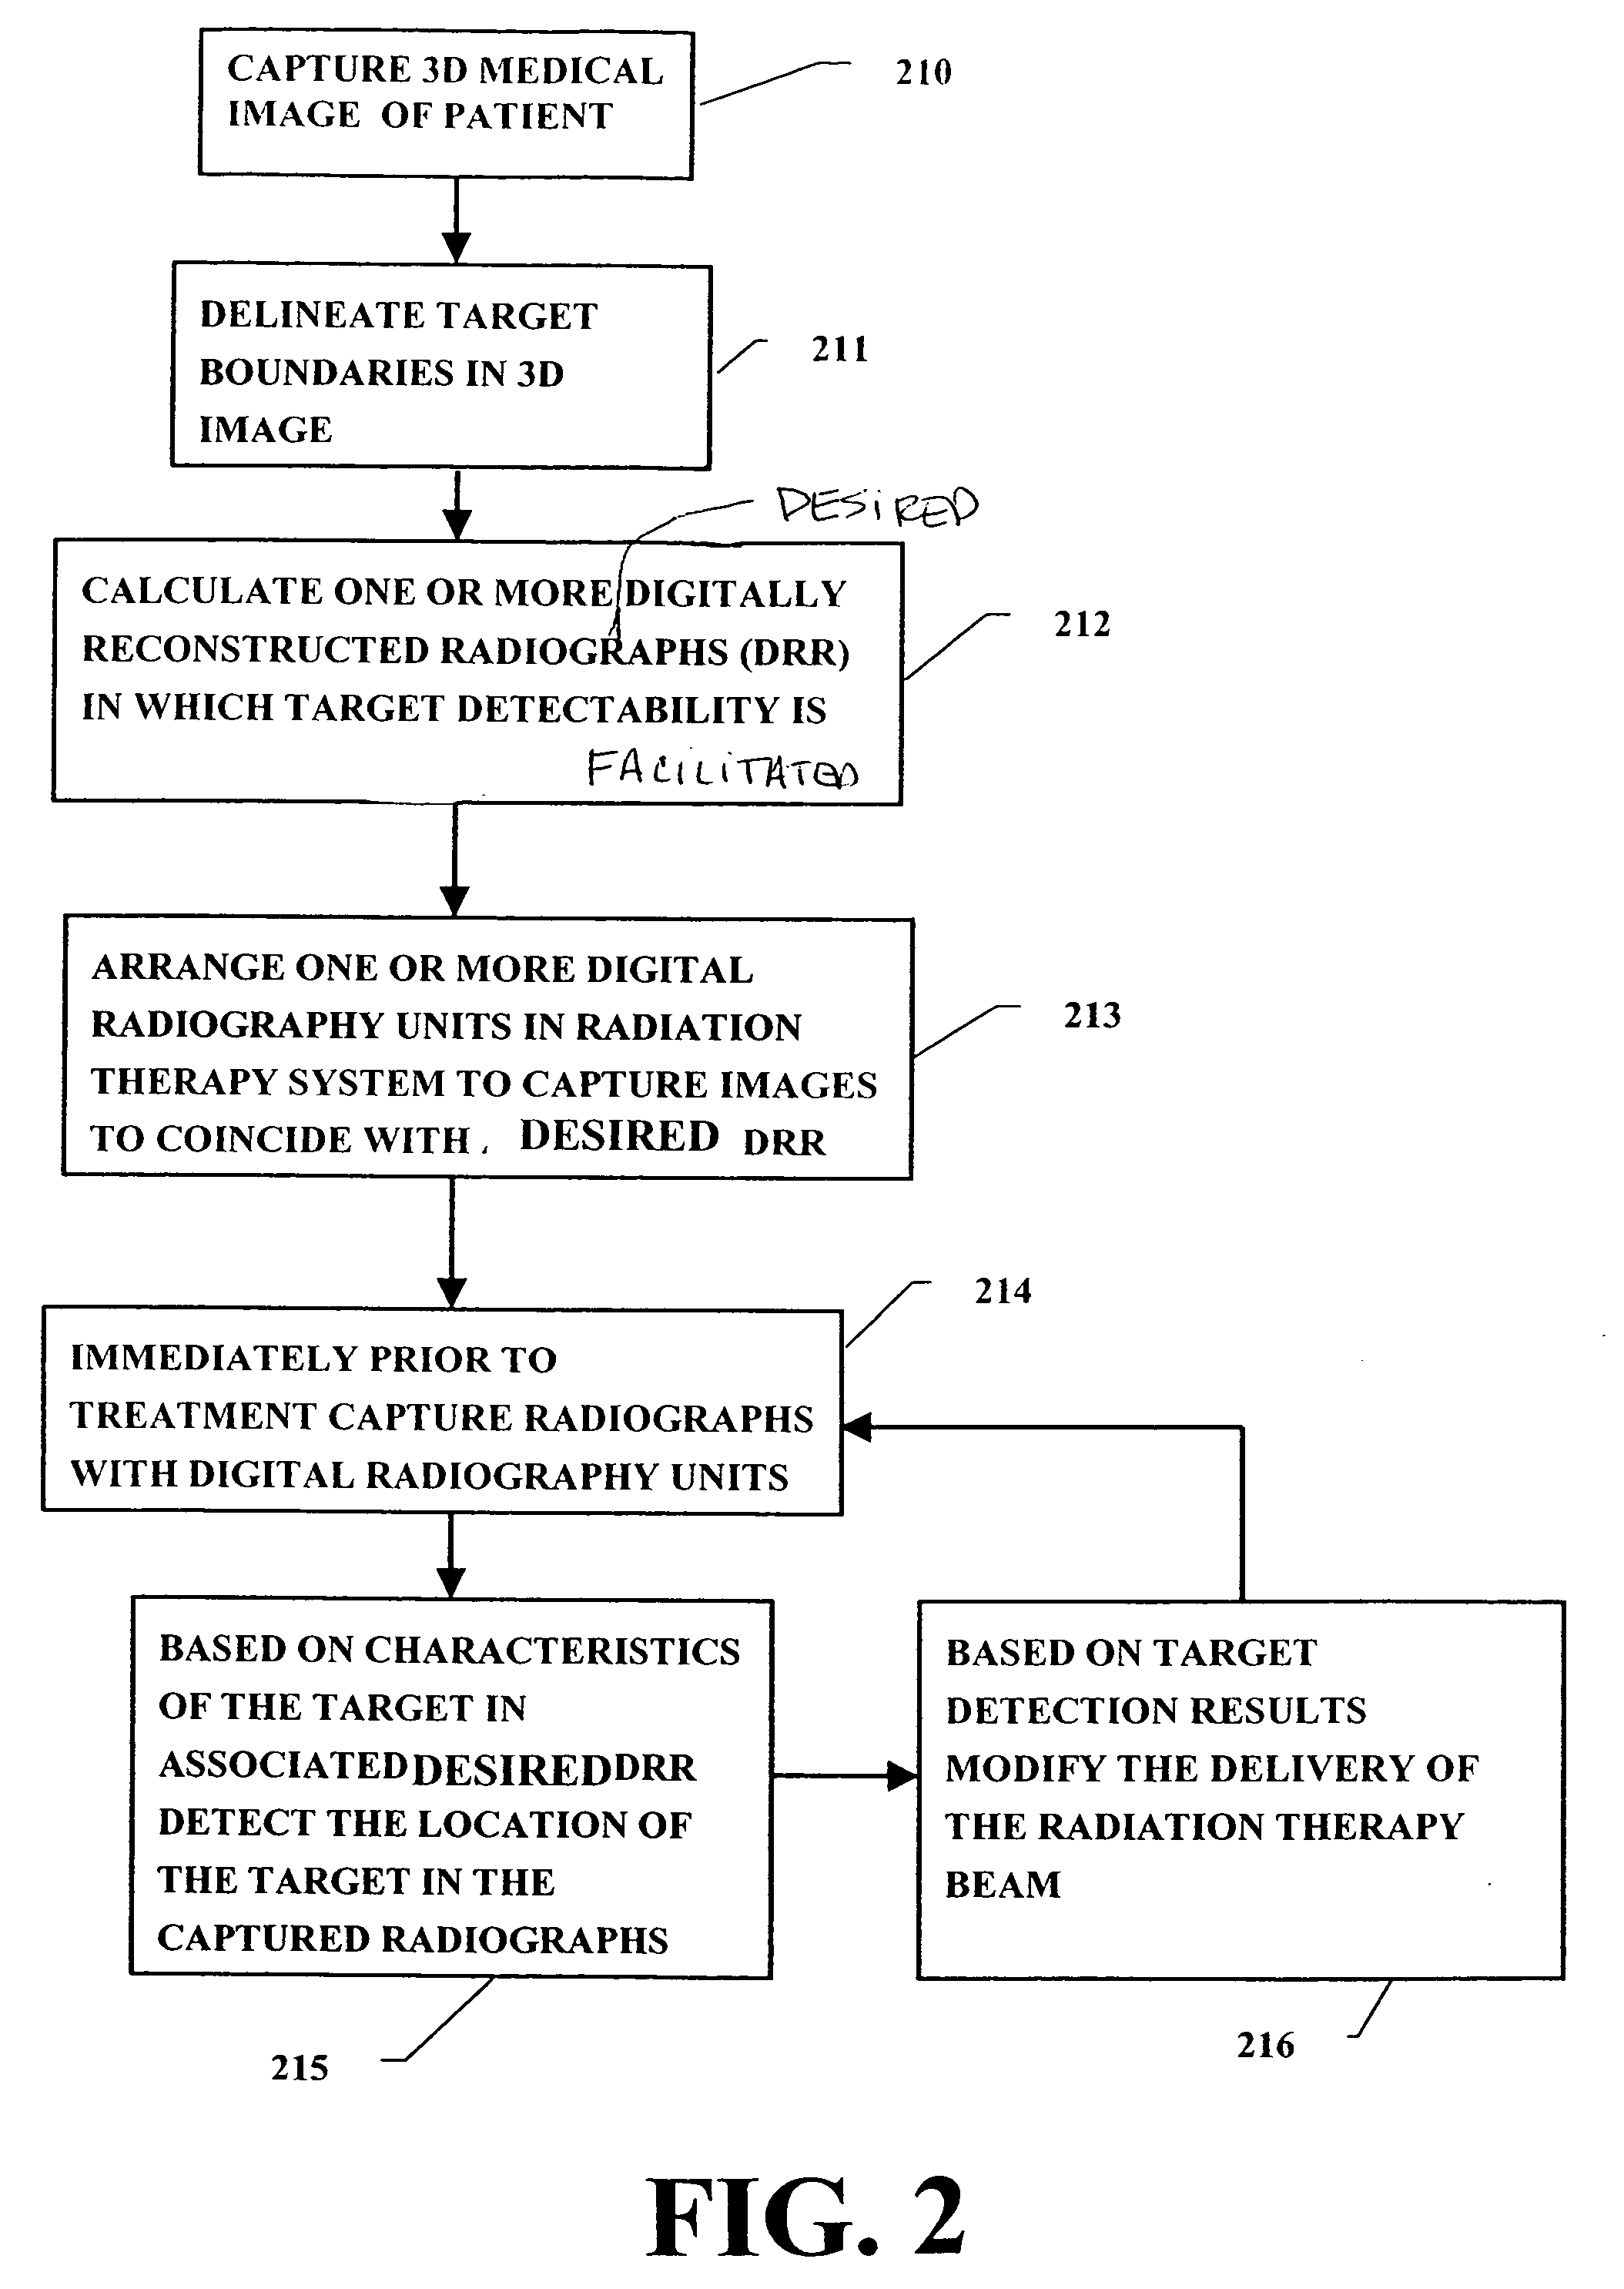 Radiation therapy method with target detection